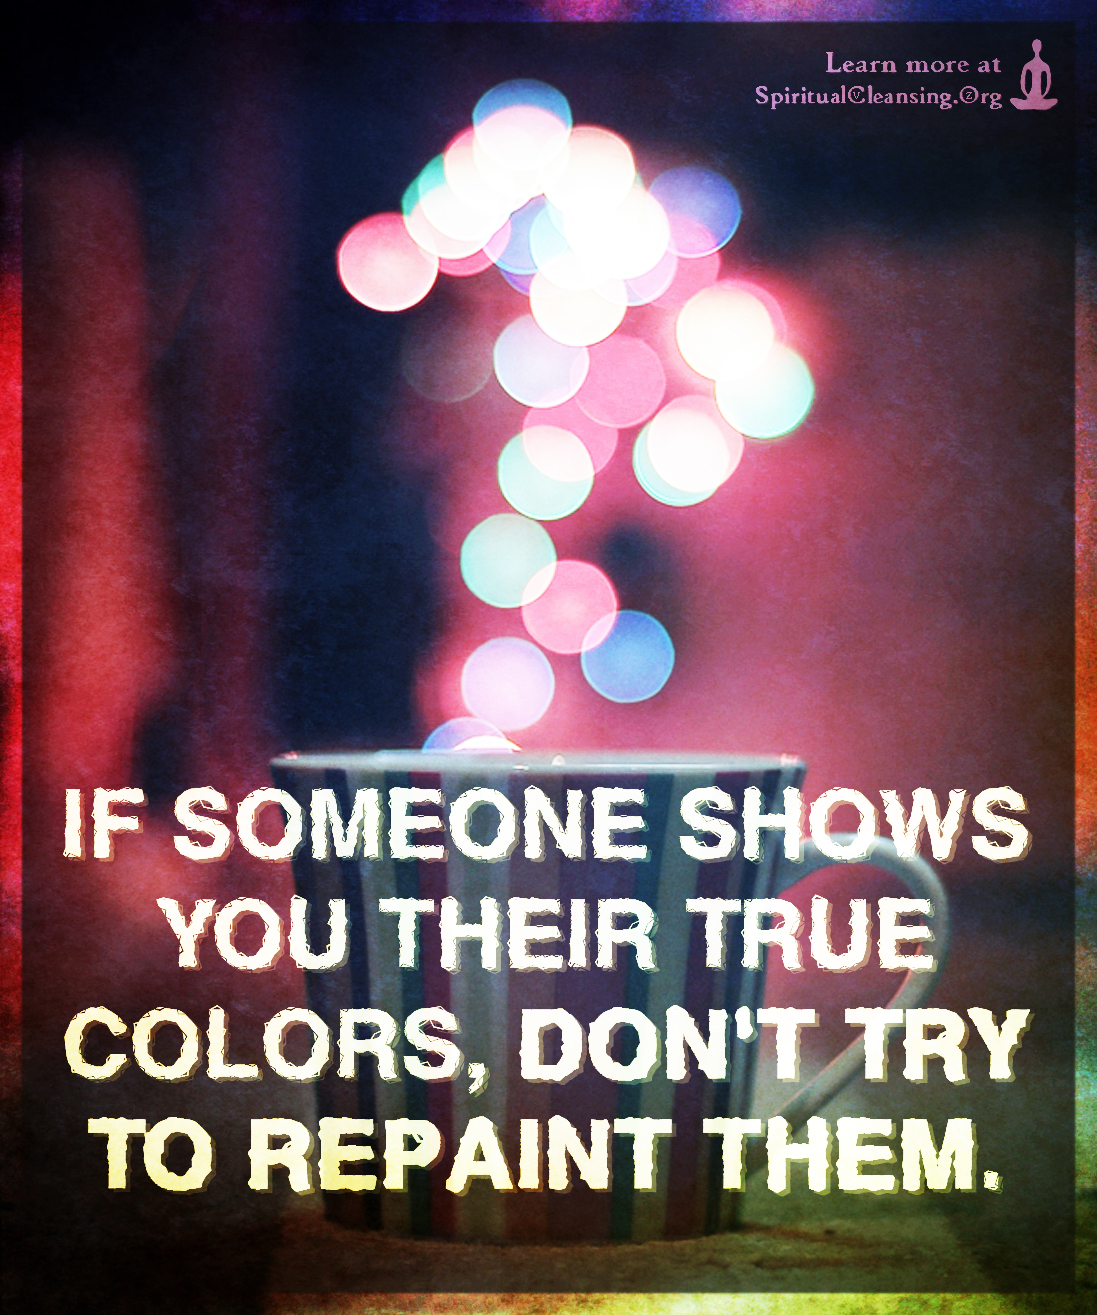 If someone shows you their true colors, don't try to repaint them - SpiritualCleansing.Org ...